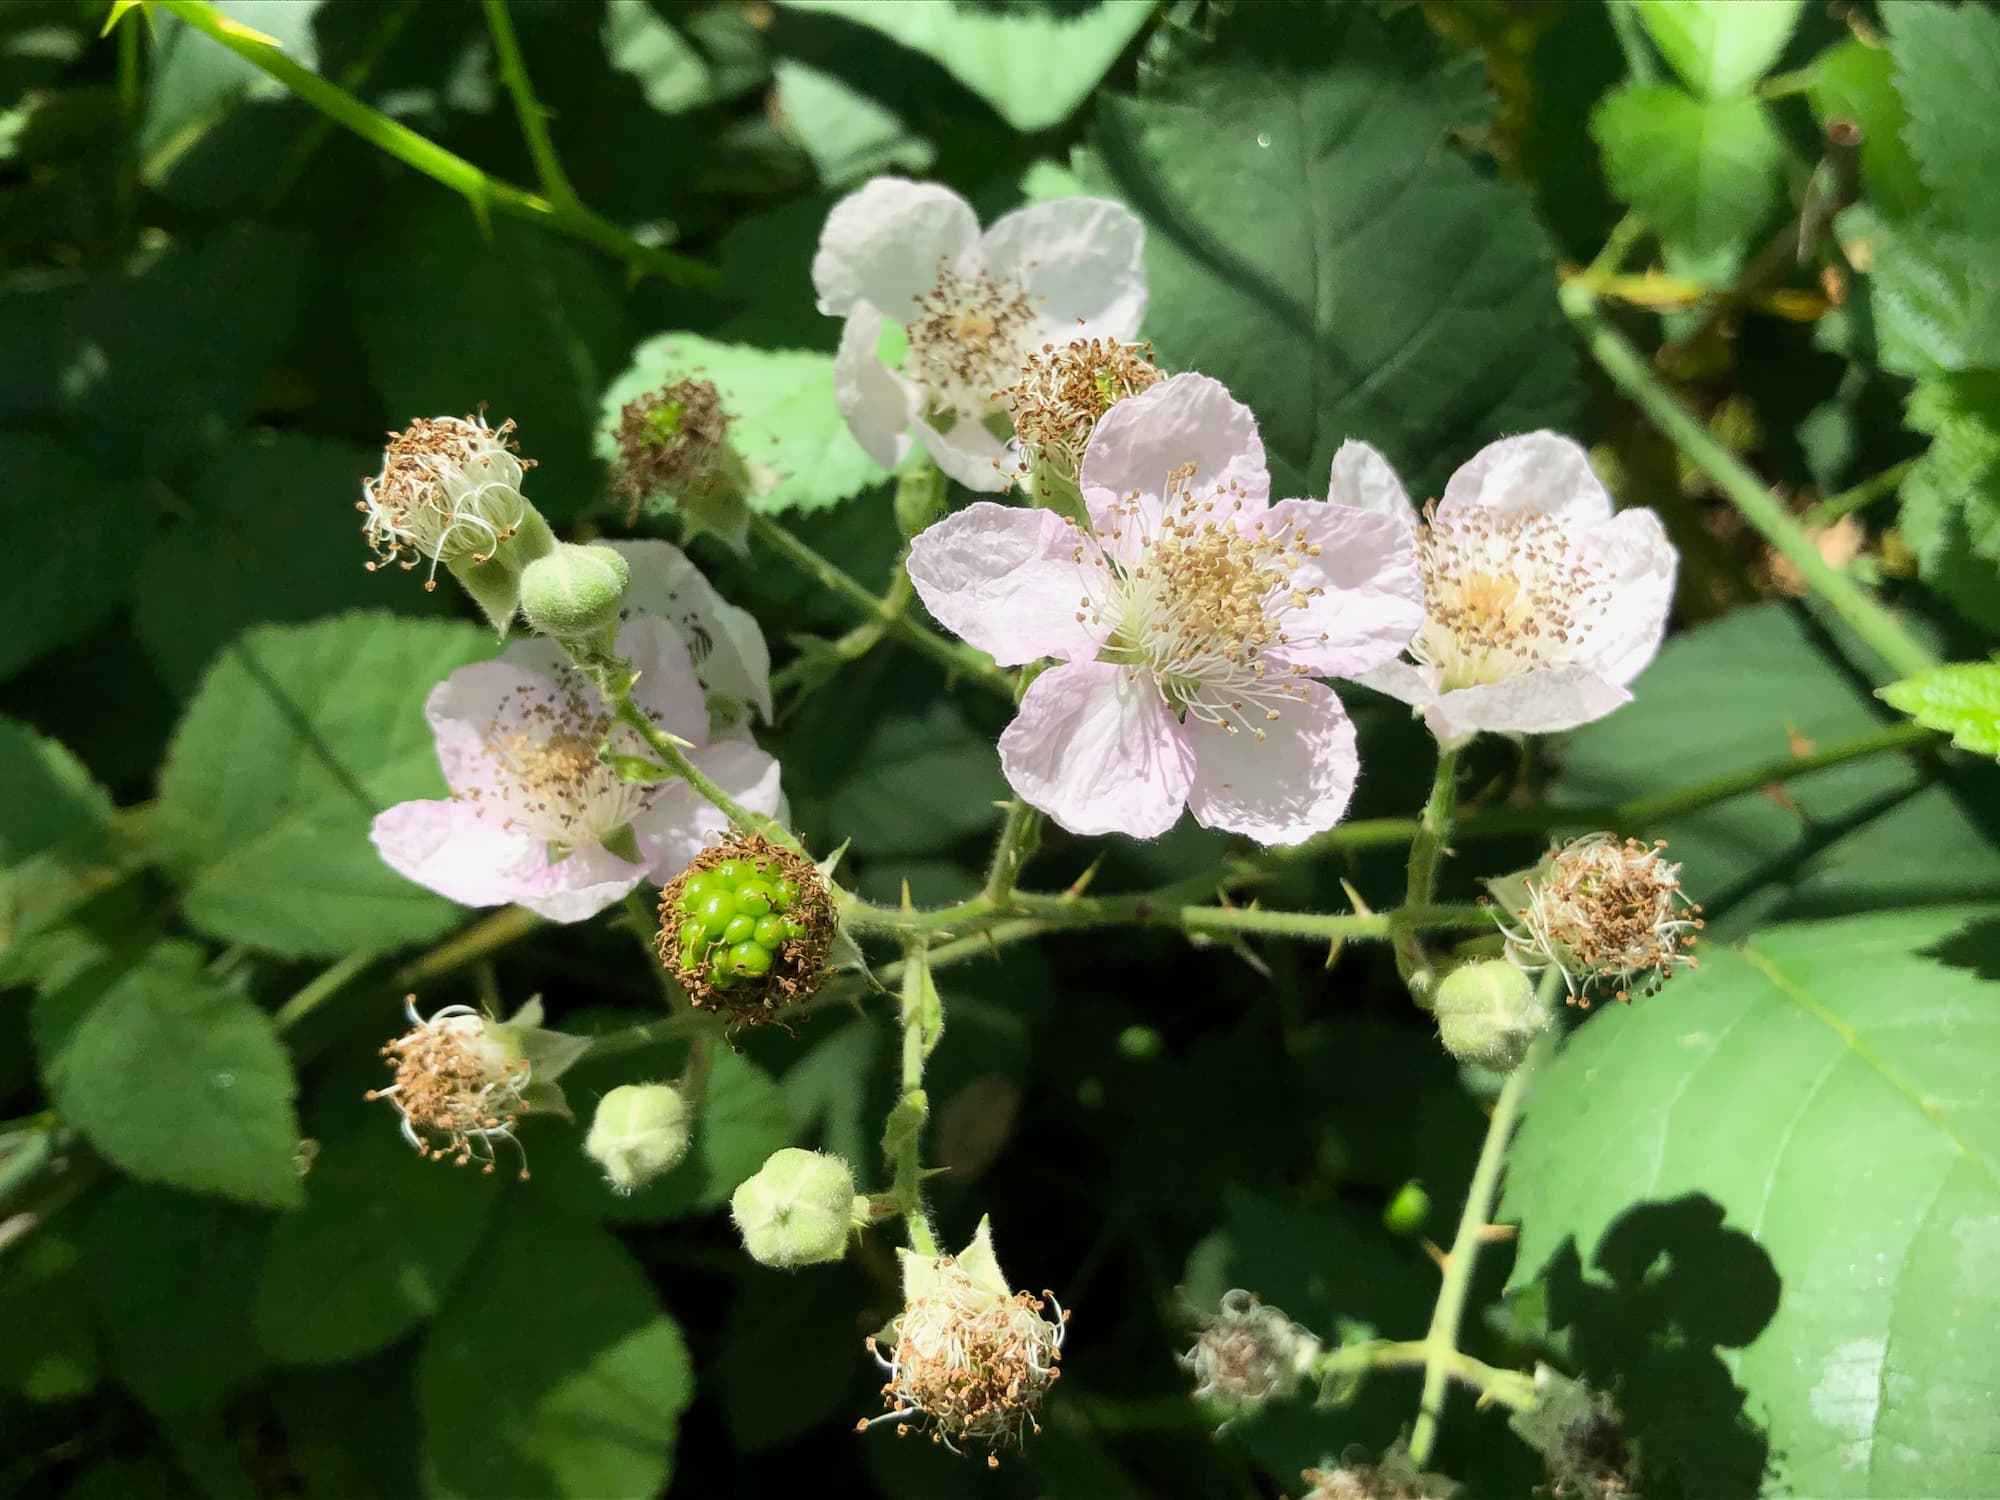 Despite their differences, nearly all Rubus species have very similar flowers that give them away as members of the Rosaceae family.